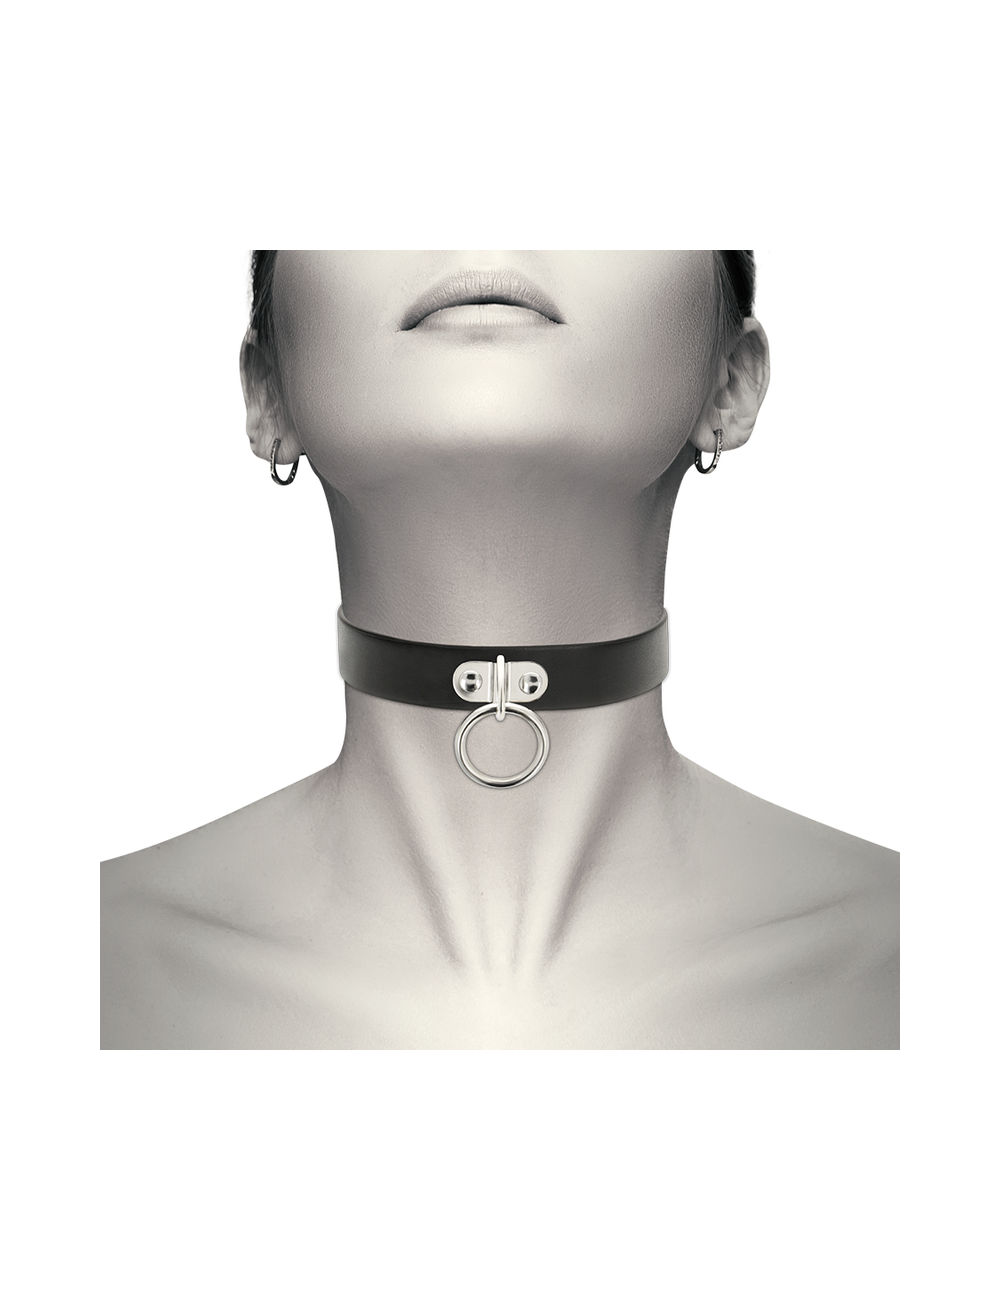 COQUETTE CHIC DESIRE HAND CRAFTED CHOKER FETISH